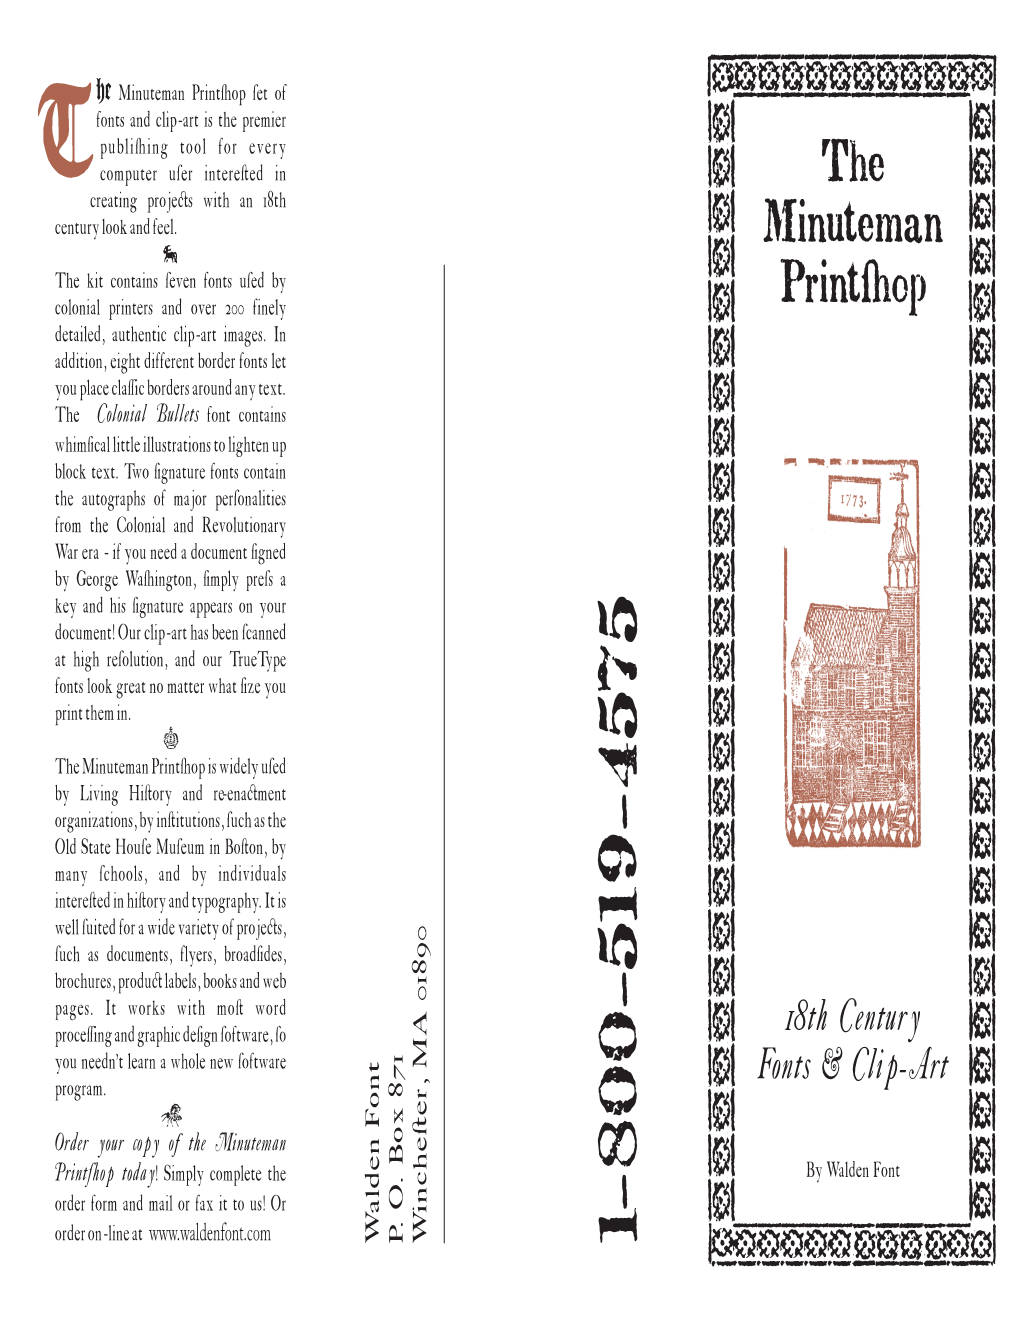 The Minuteman Printshop Ships on CD- E-Mail: @ 46ROM